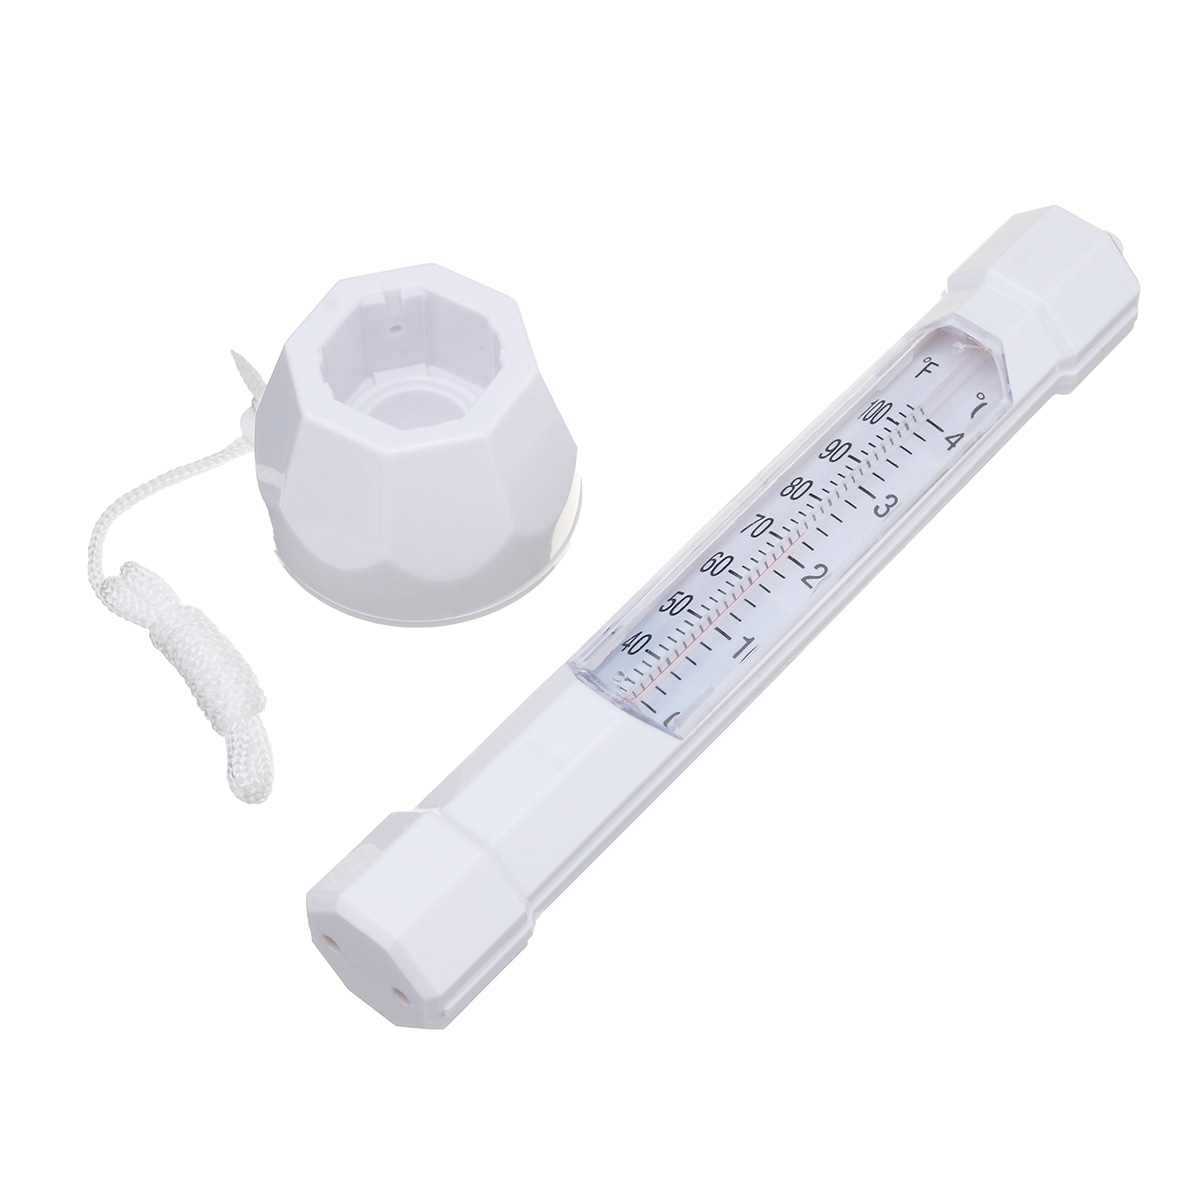 White-Floating-Water-Swimming-Pool-Bath-Spa-Hot-Tub-Temperature-Thermometer--1151459-6